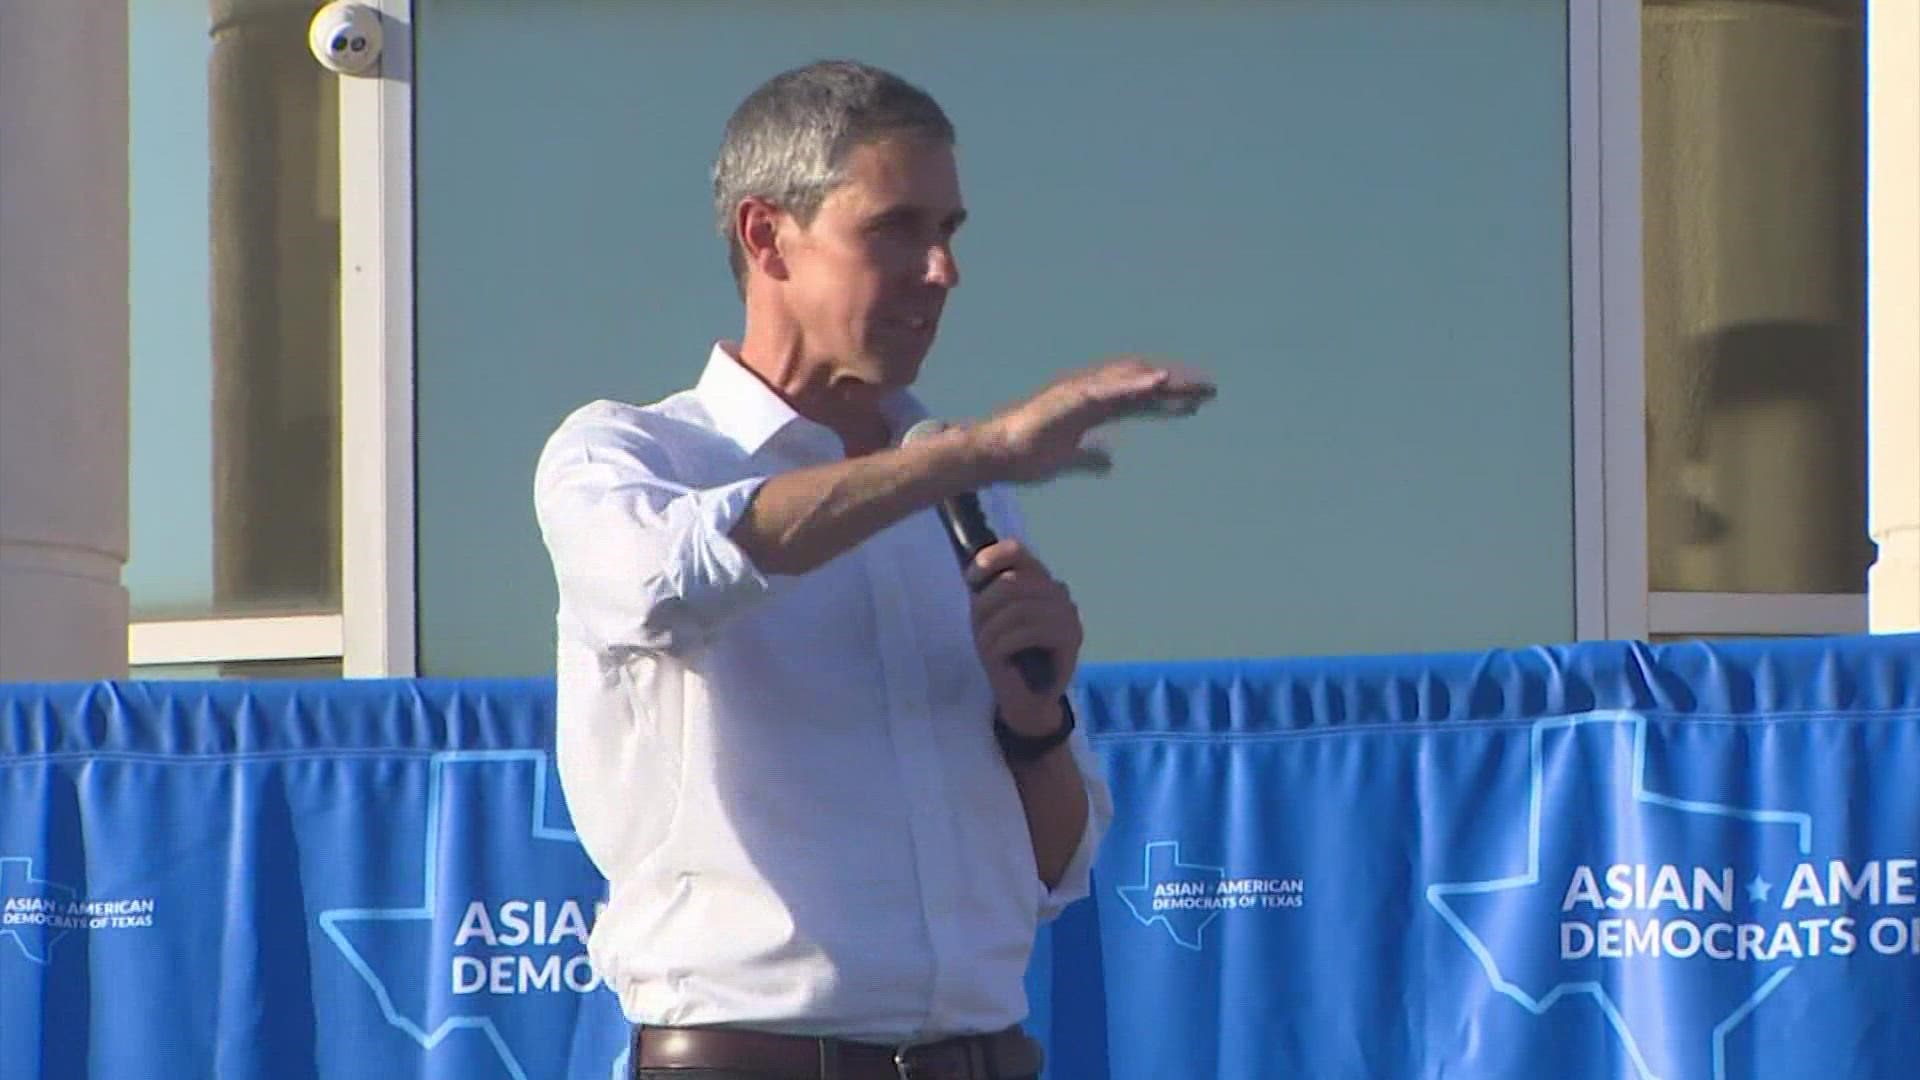 Saturday, Texas gubernatorial candidate Beto O'Rourke was in Asiatown for a rally hosted by the Asian American Democrats of Texas Caucus Houston Chapter.